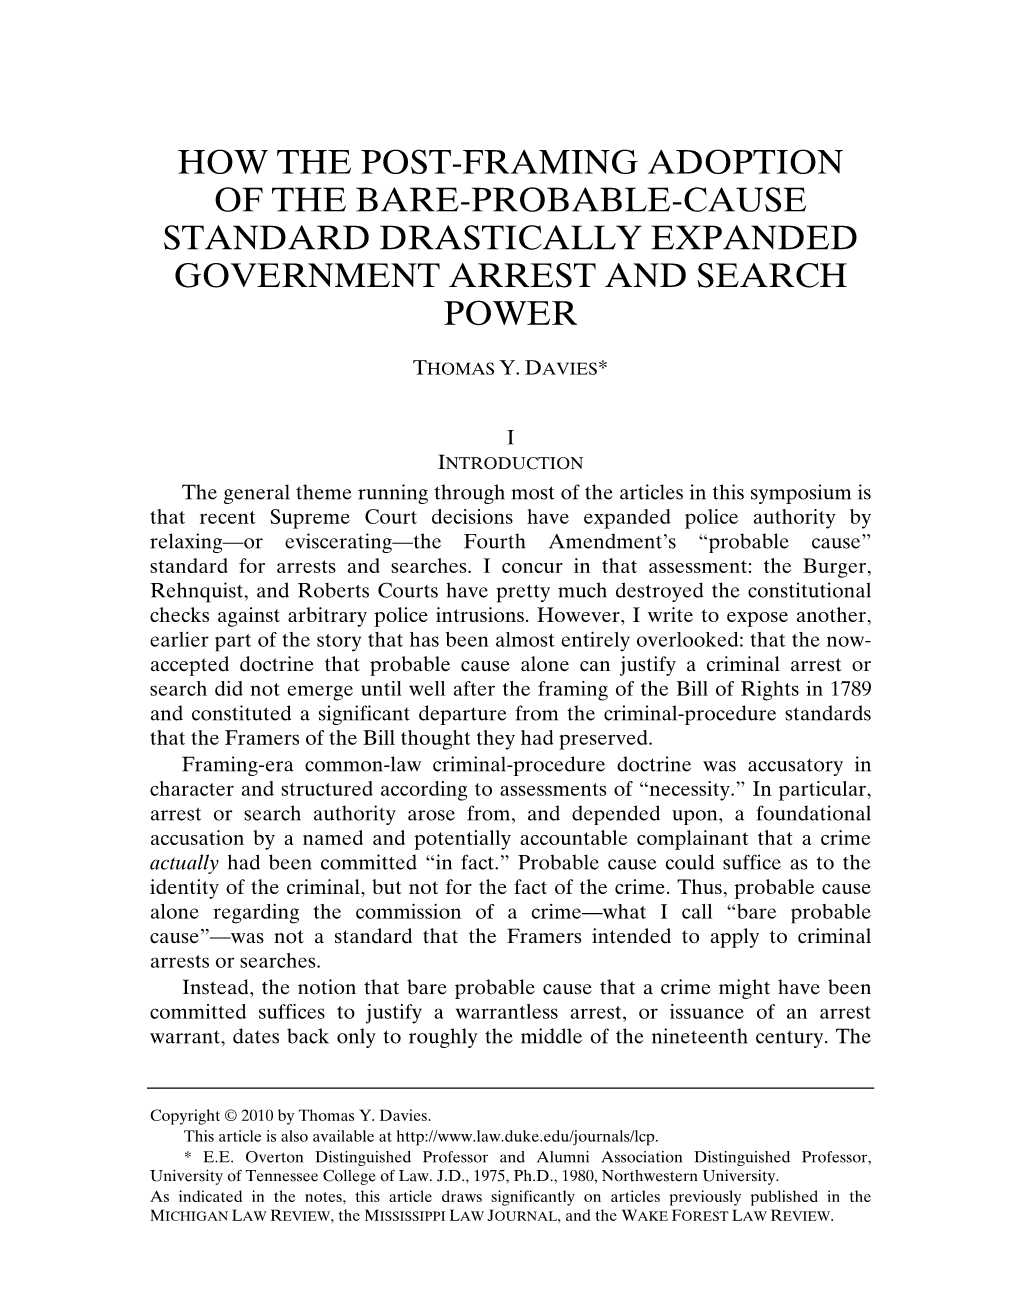 How the Post-Framing Adoption of the Bare-Probable-Cause Standard Drastically Expanded Government Arrest and Search Power